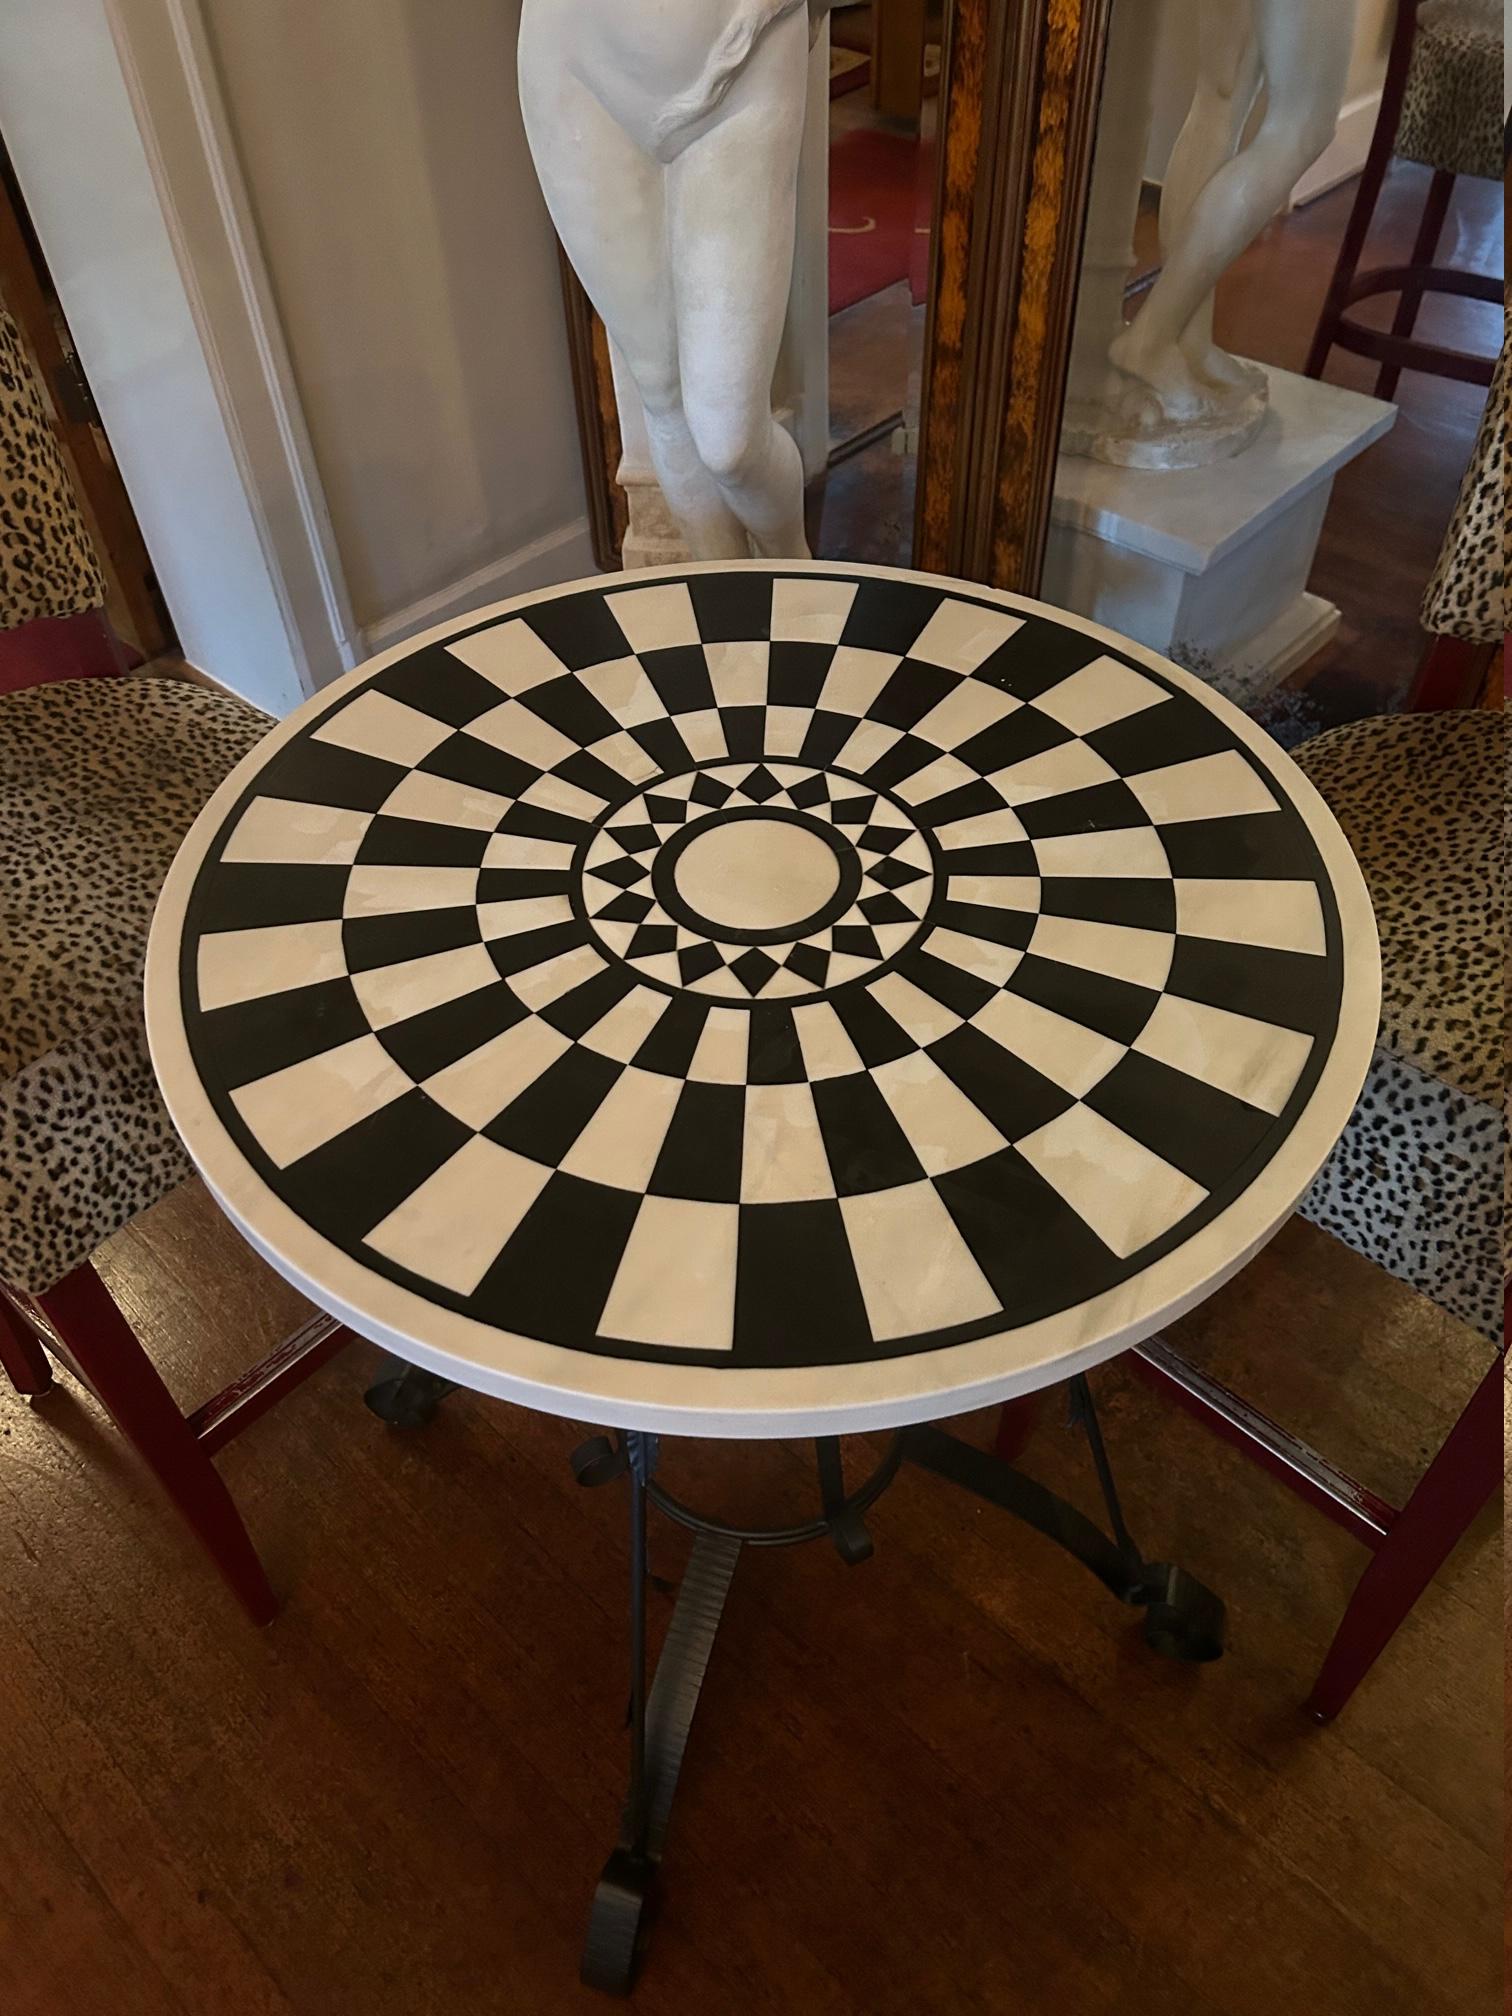 These pair of side tables are unique.
The black and white marble top are in very good condition also the base.

